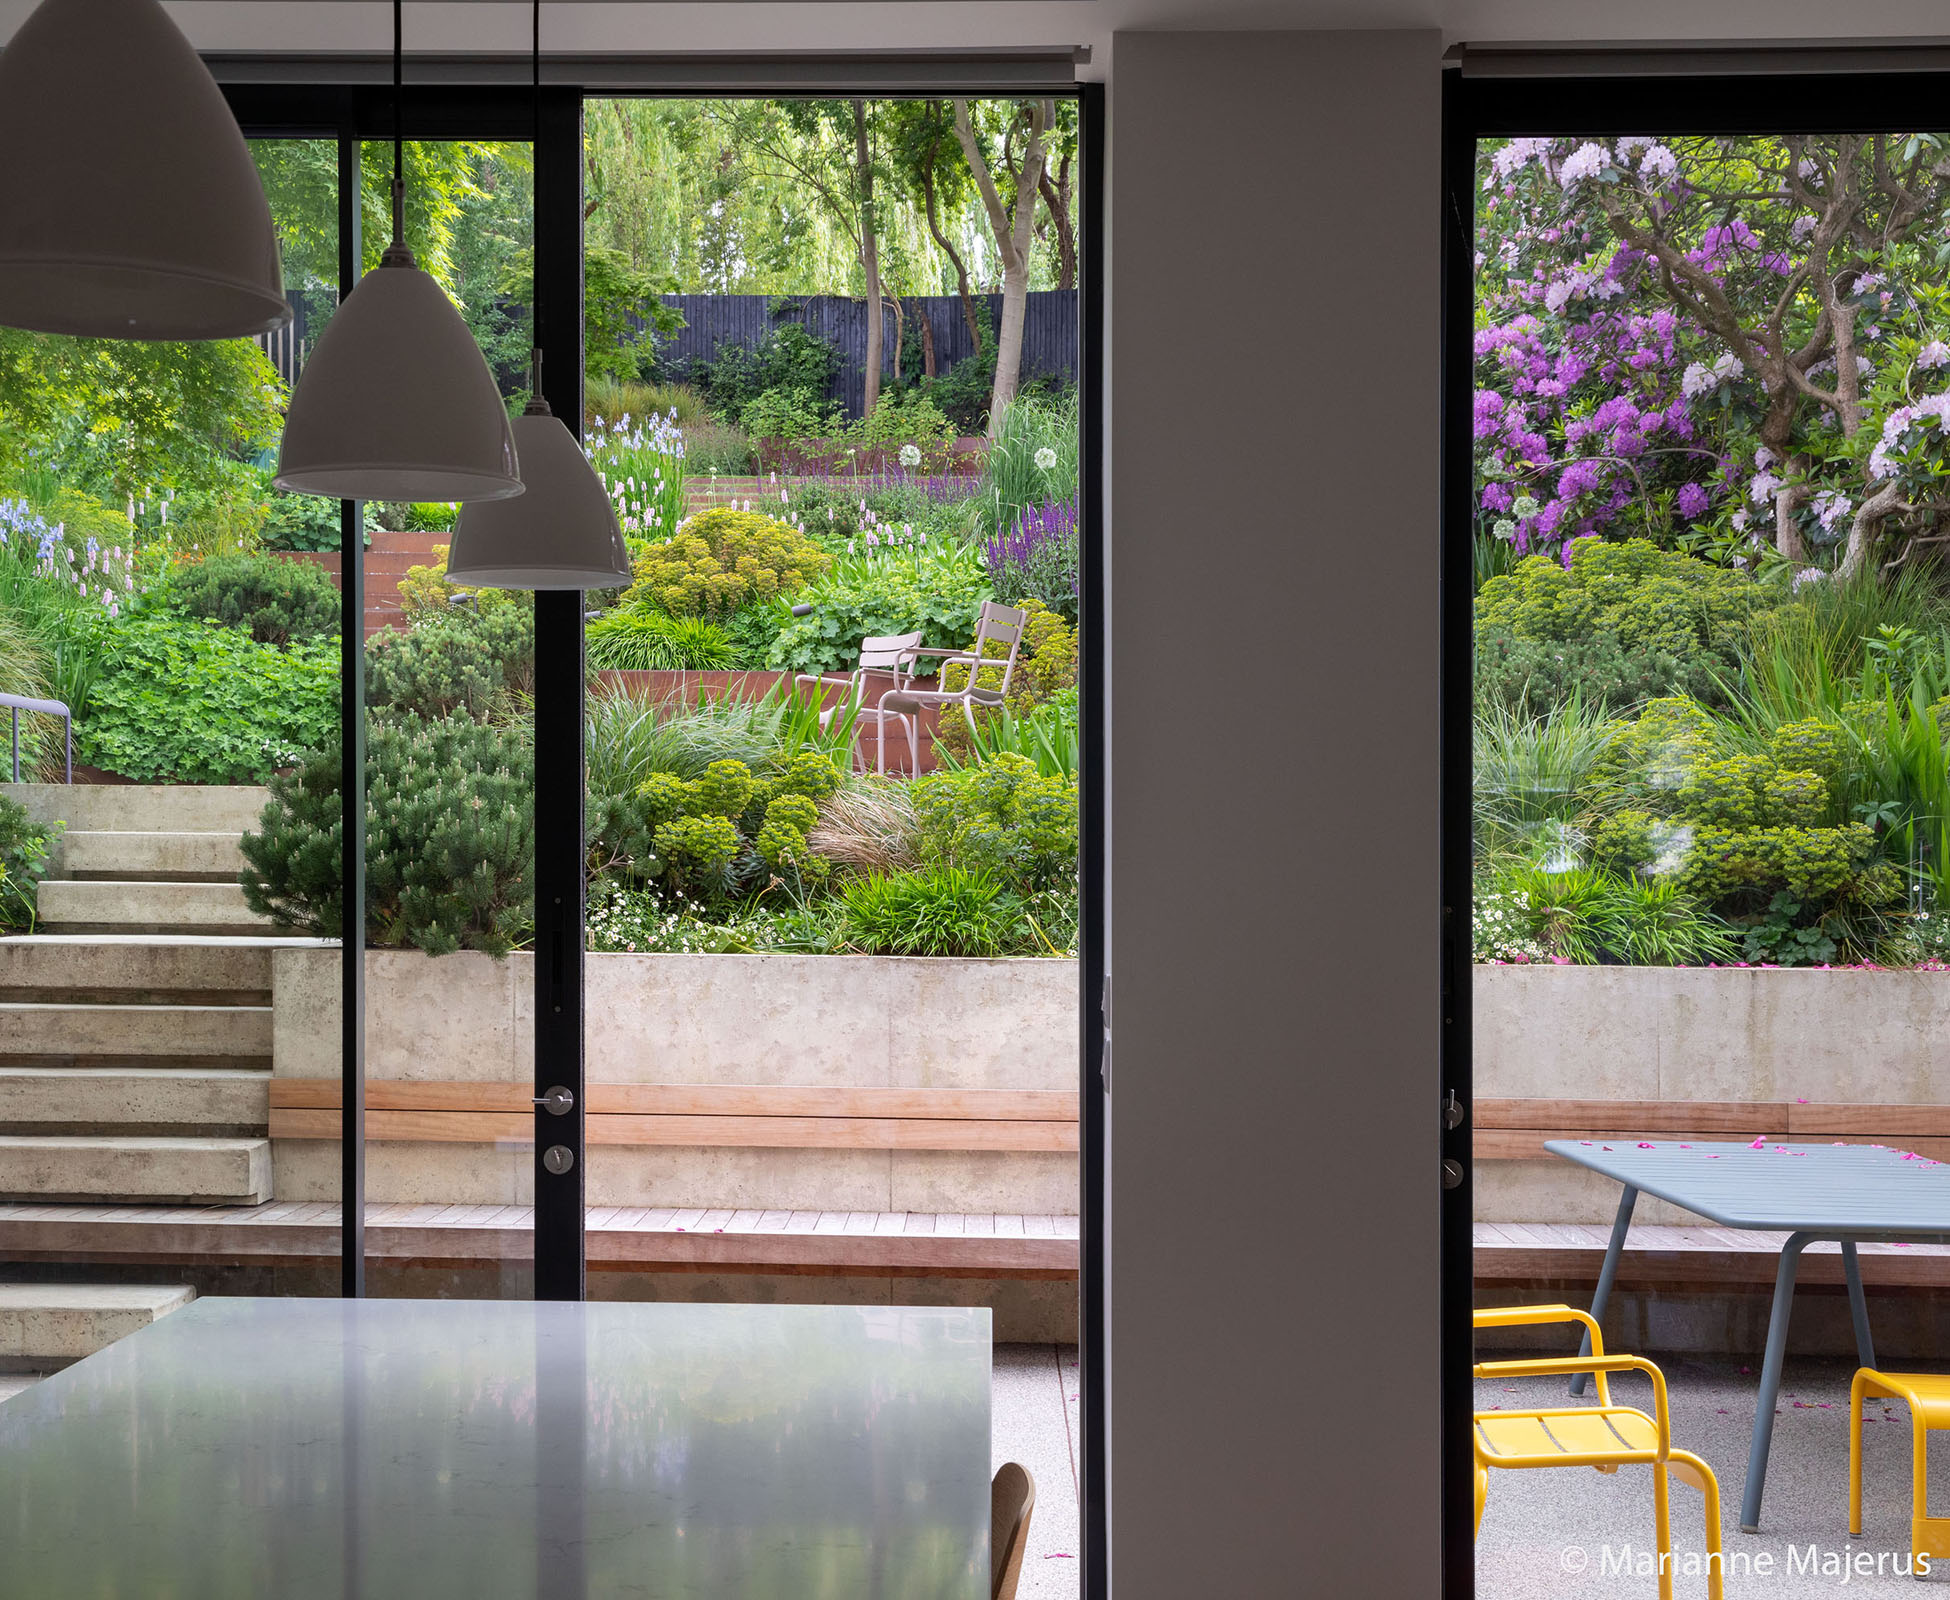 Theatrical view of the garden from the tall sliding doors of the house kitchen, enticing you out to explore.